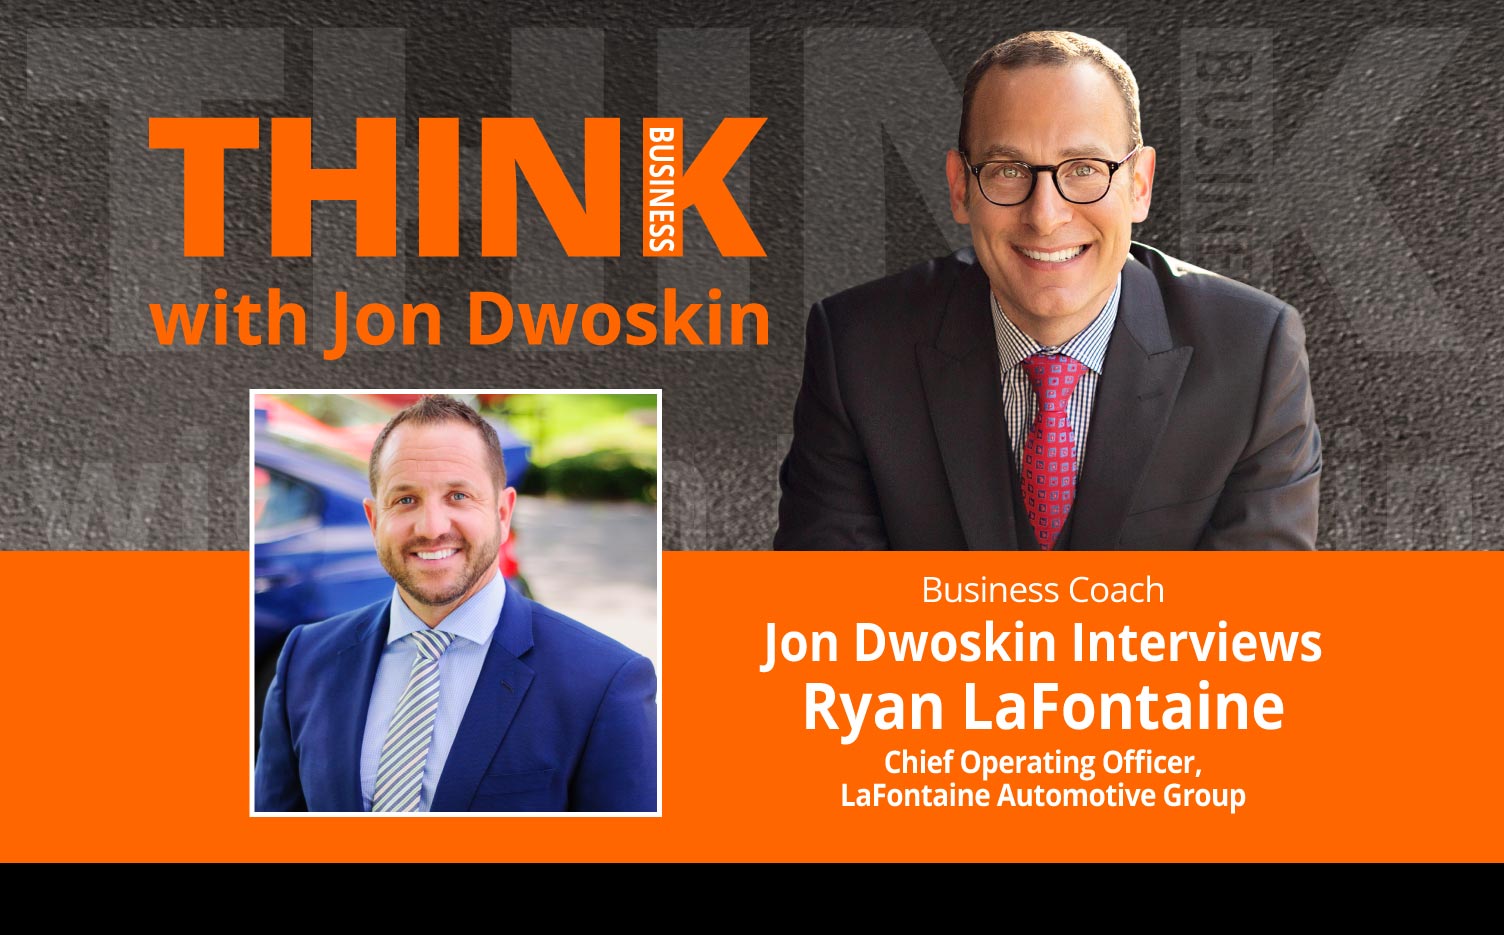 THINK Business Podcast: Jon Dwoskin Interviews Ryan LaFontaine, Chief Operating Officer, LaFontaine Automotive Group